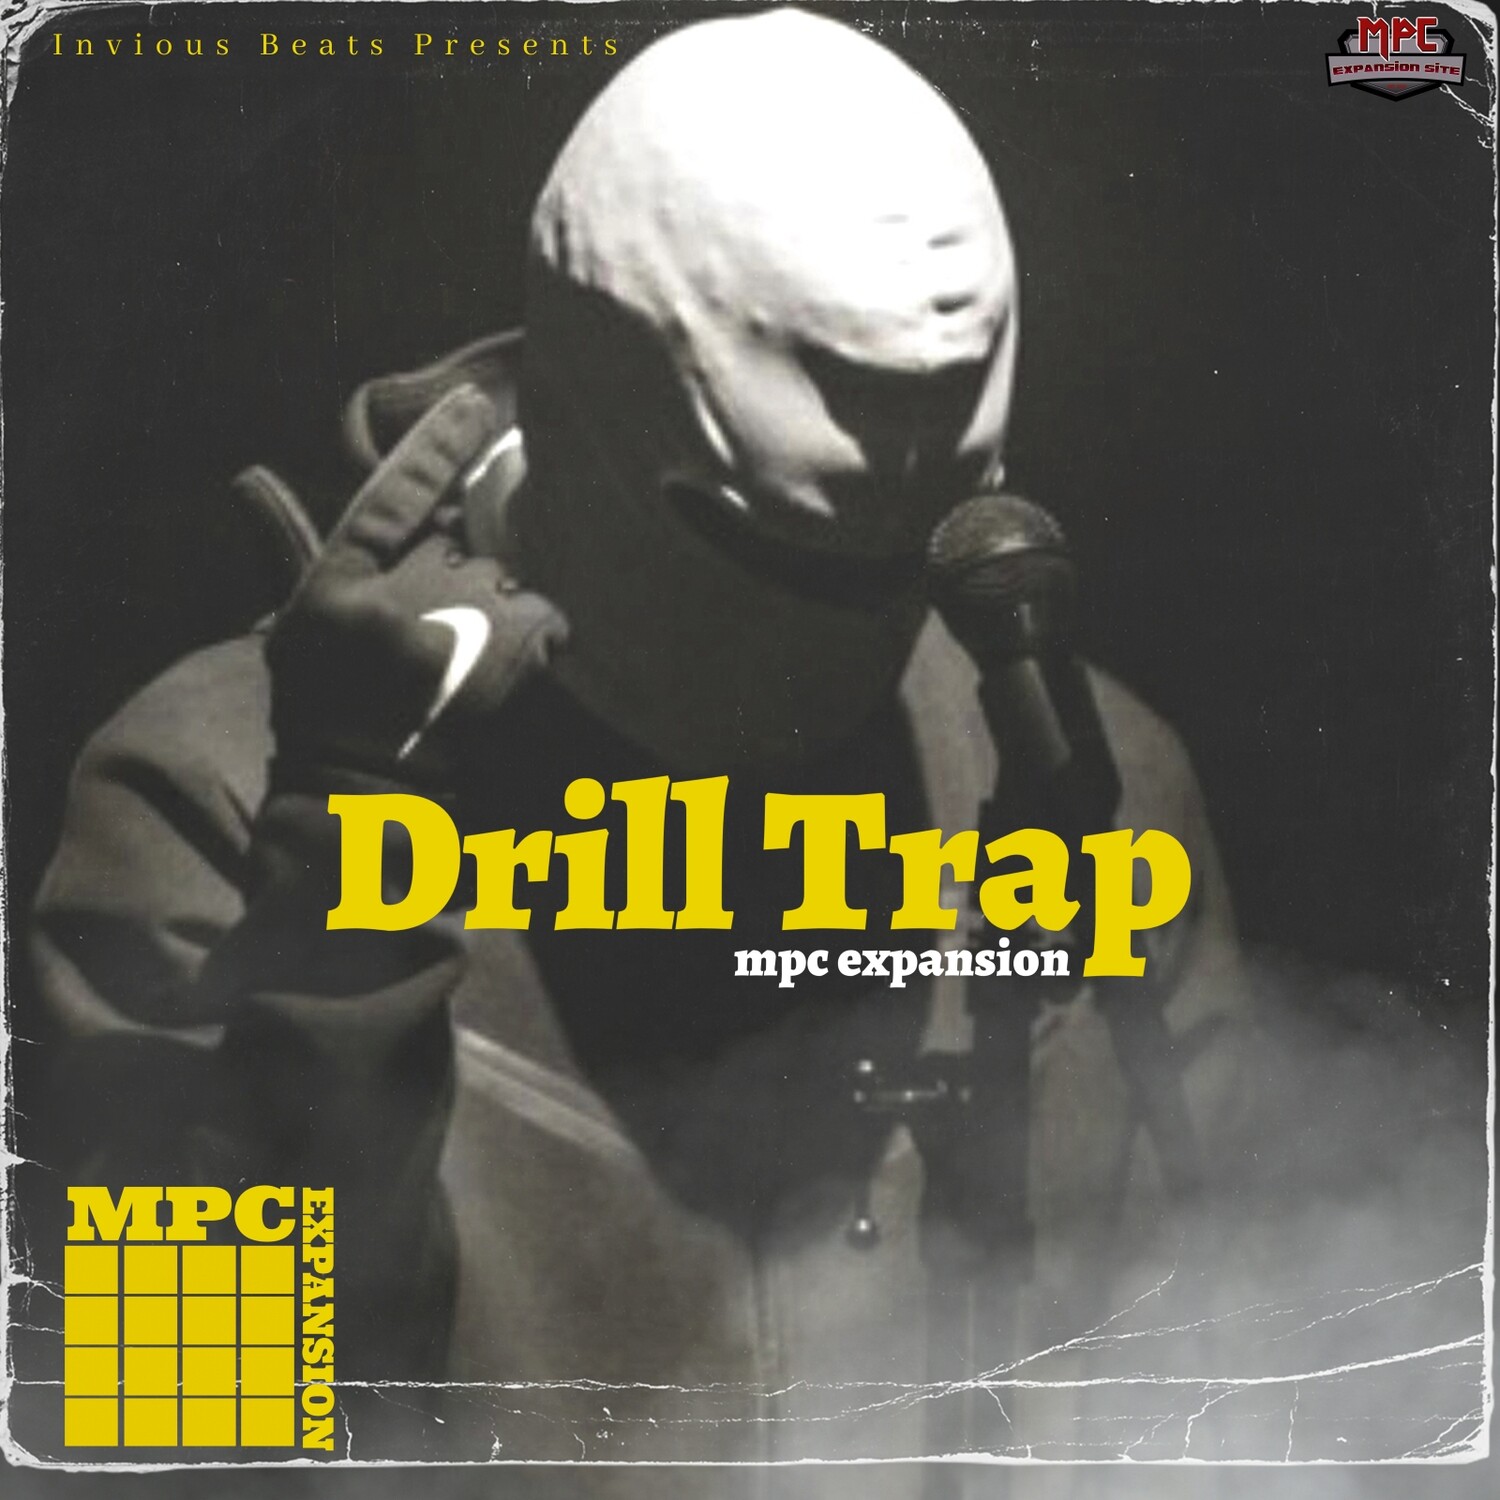 MPC EXPANSION 'DRILL TRAP' by INVIOUS